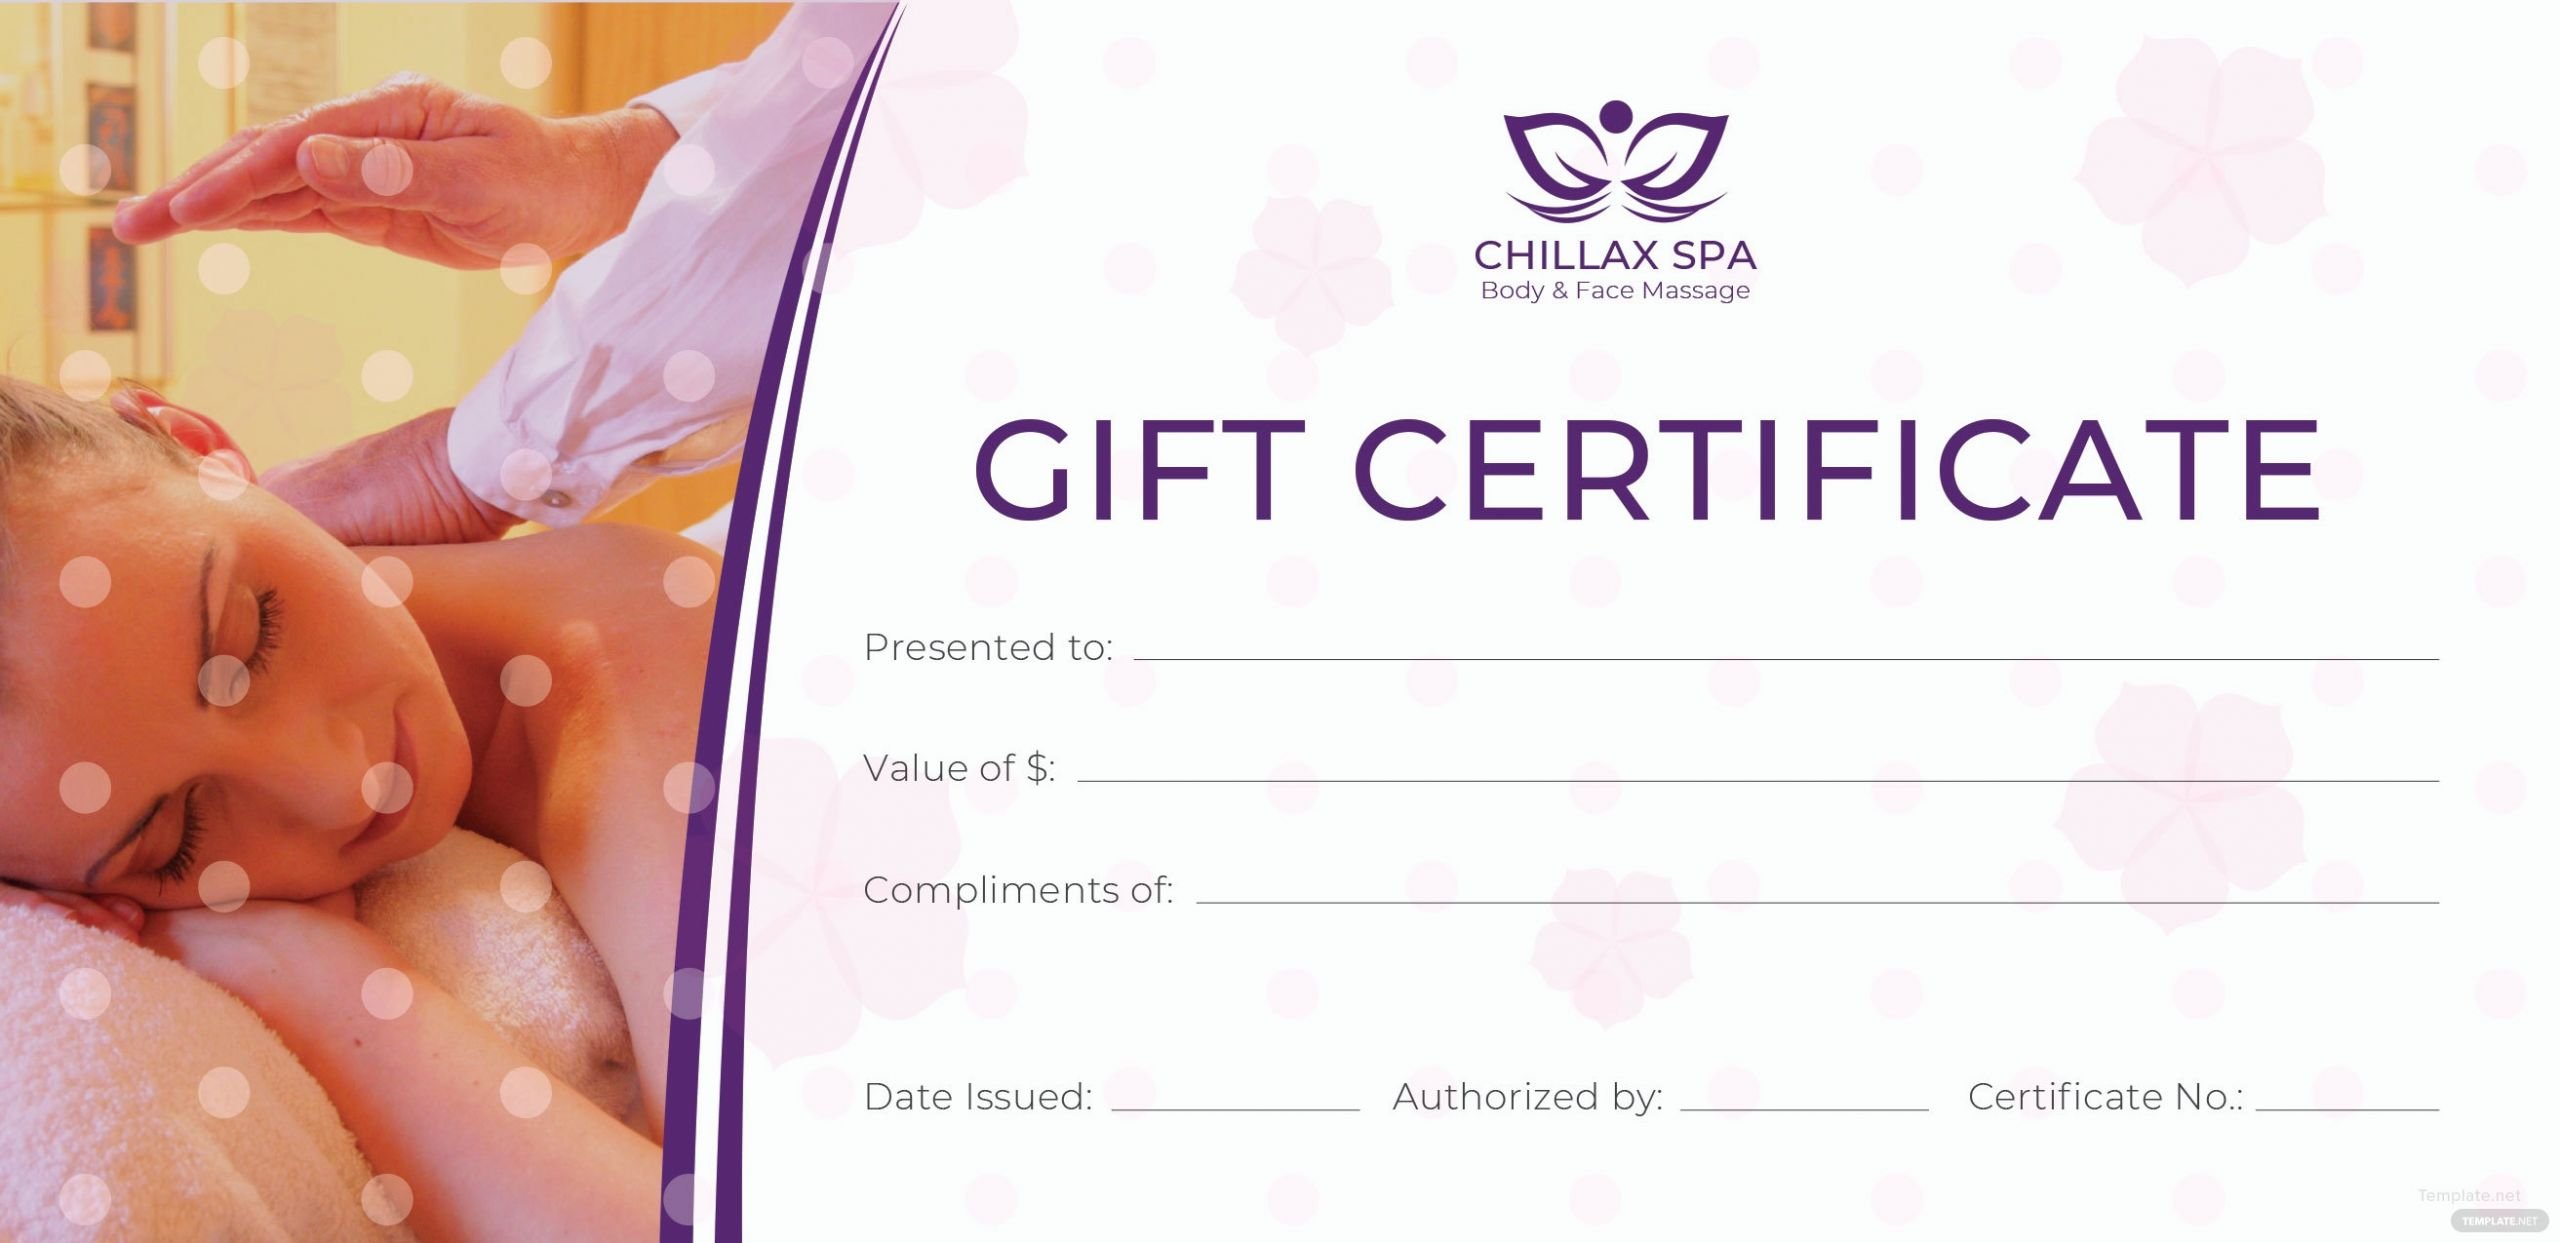 Facial Gift Certificate Template New Free Massage Gift Certificate Template In Adobe